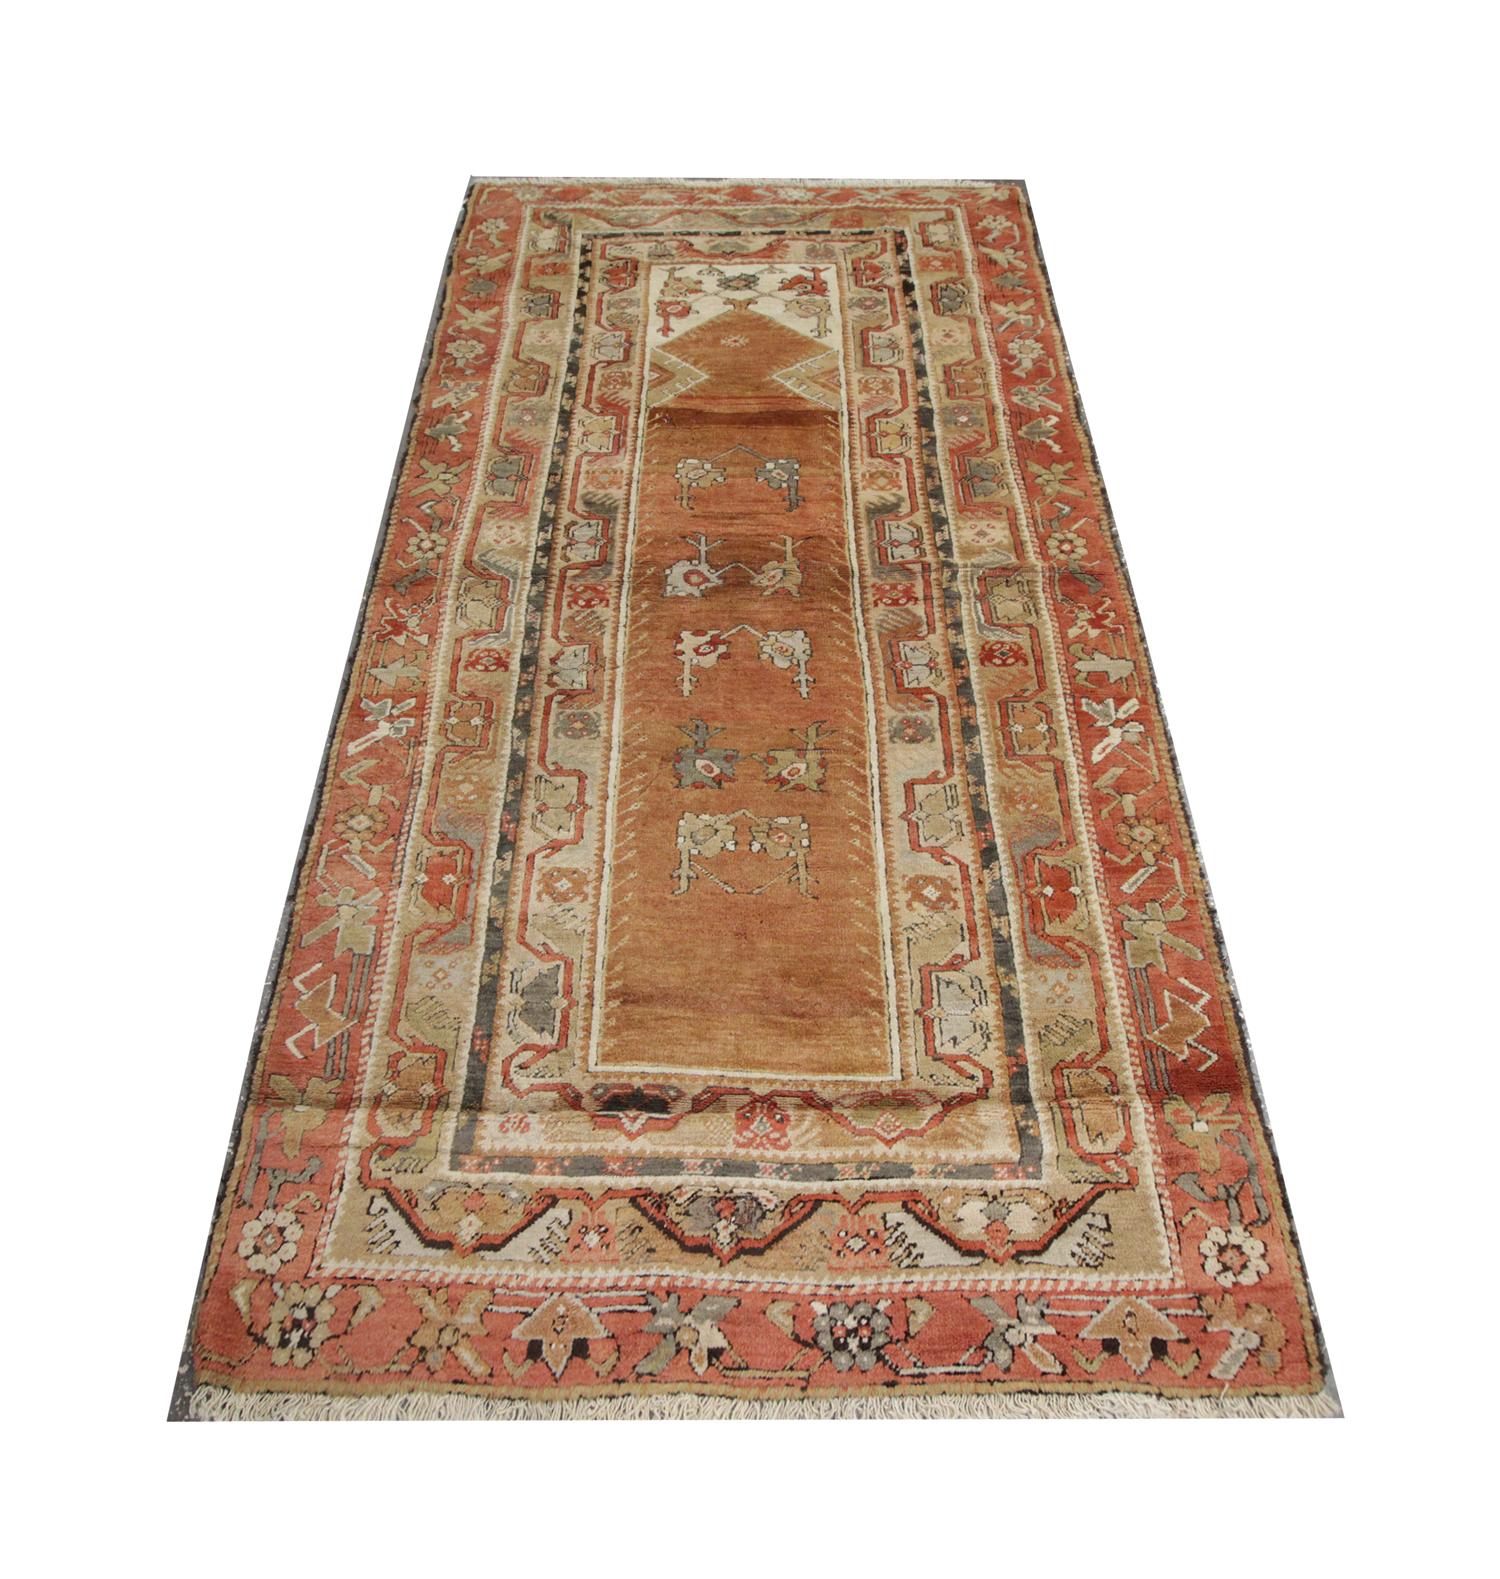 This handmade carpet with deep blue central Asian antique rug was handwoven in Kohtan in 1989. Three circular emblems flow through the centre in red and peach, surrounded by geometric flower motifs. Enclosed by patterned corner designs and a layered